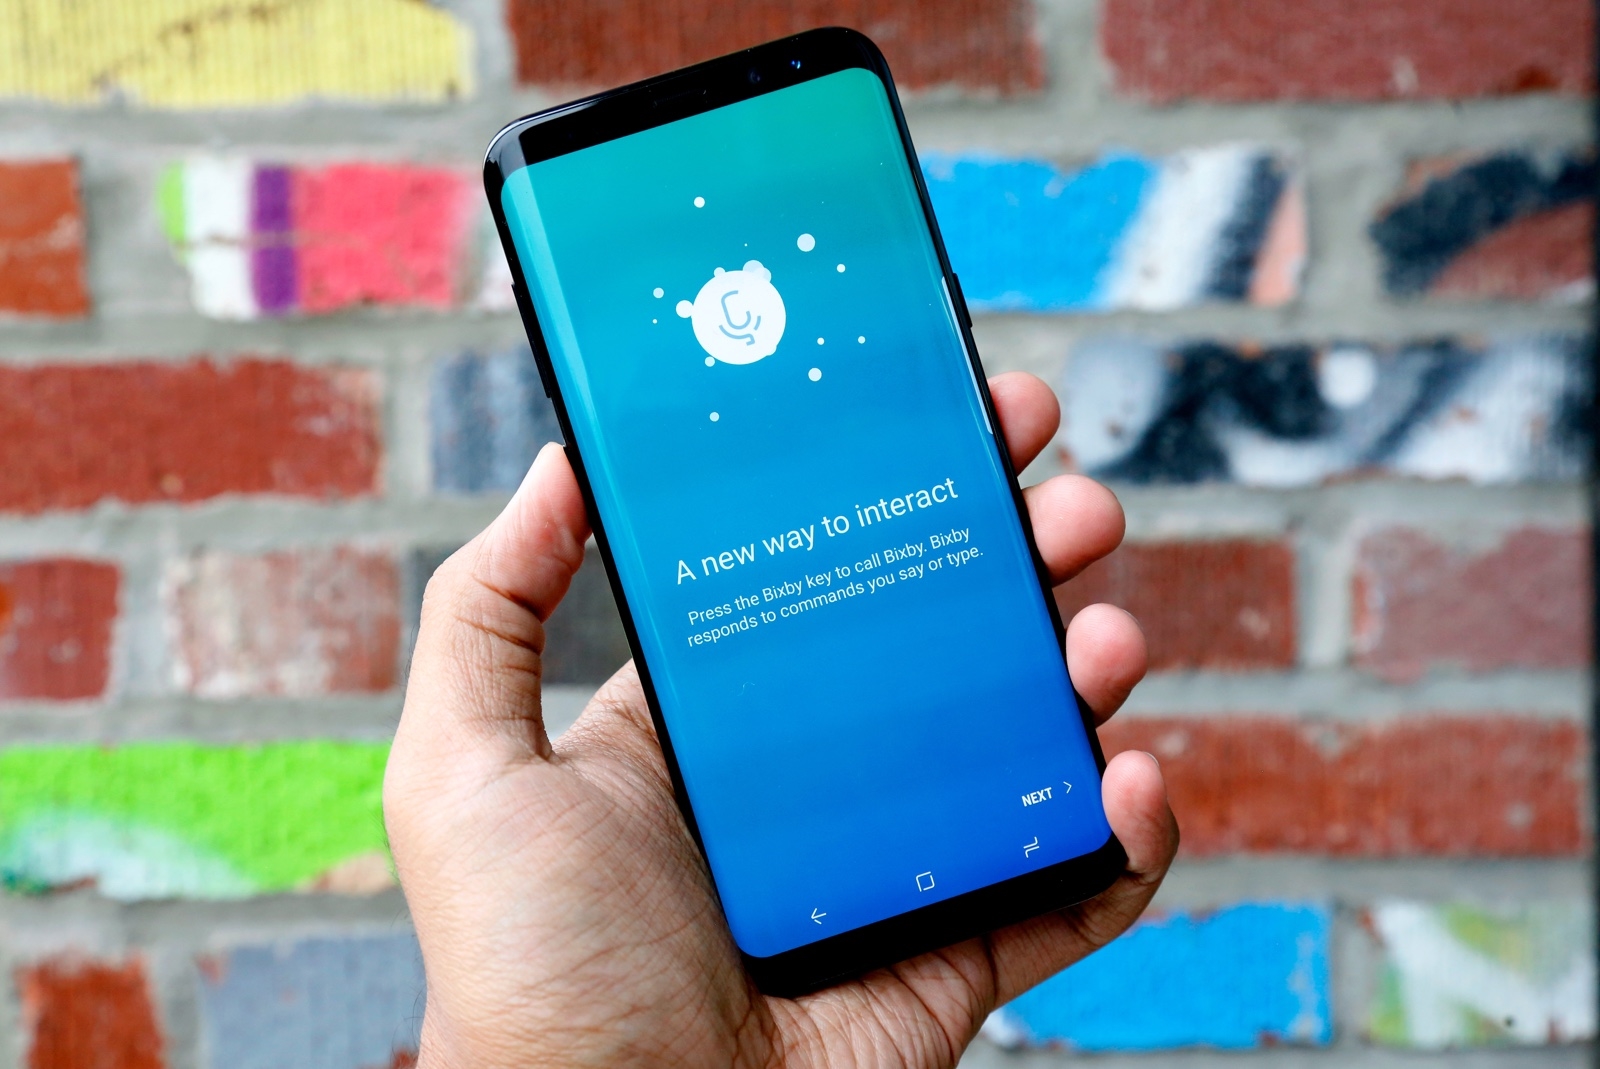 Life with Bixby is equal parts futuristic and frustrating | DeviceDaily.com